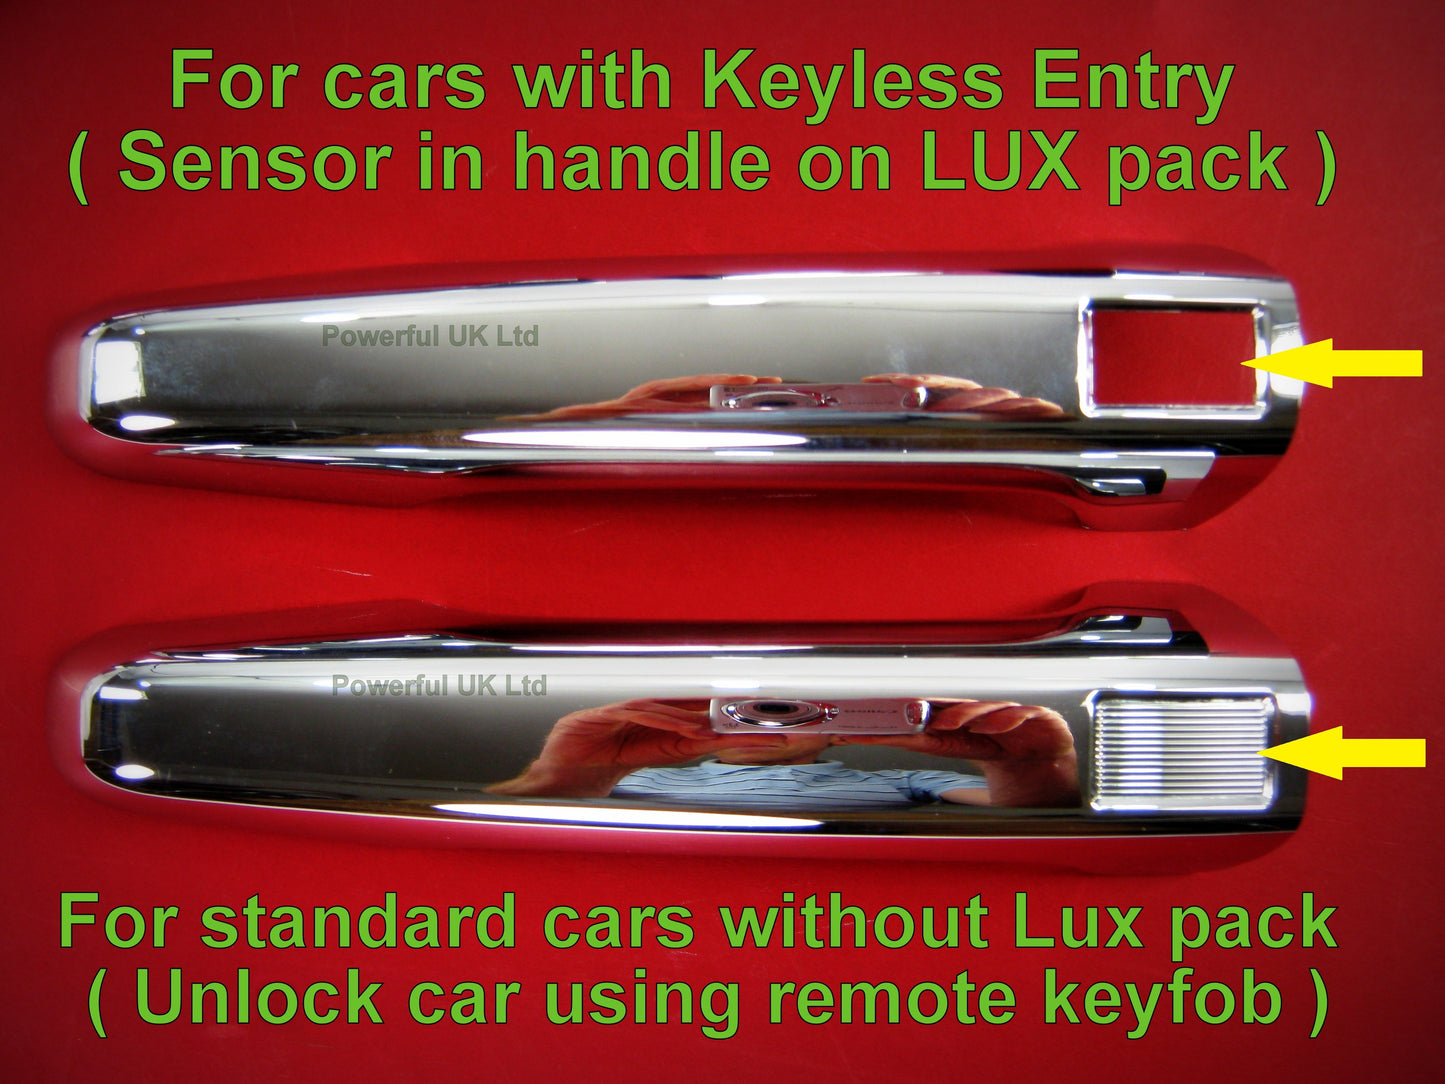 Door Handle 5 door cover kit for Range Rover Evoque L538 with Key Fob locking- Chrome